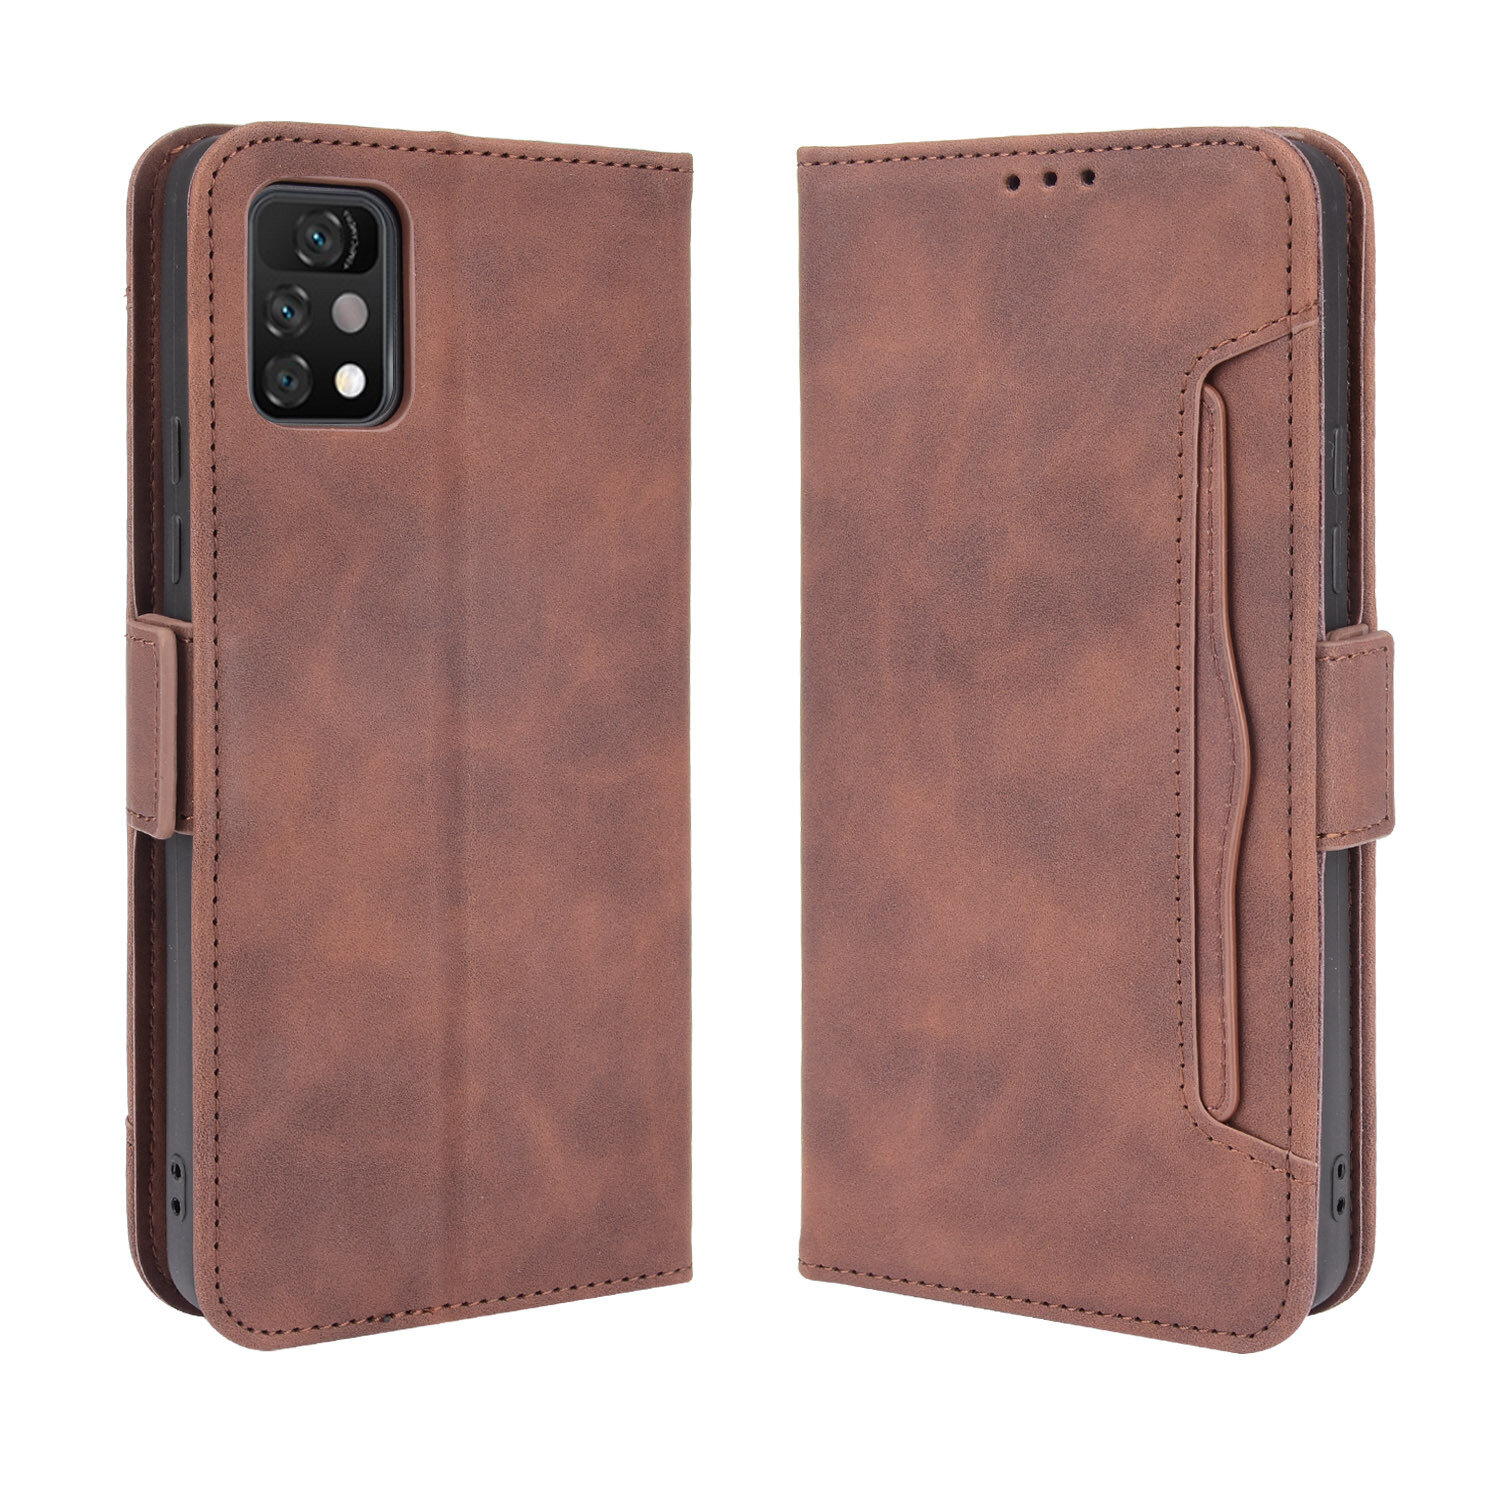 

Bakeey for Umidigi A11 Pro Max Case Magnetic Flip with Multiple Card Slot Wallet Folding Stand PU Leather Shockproof Ful